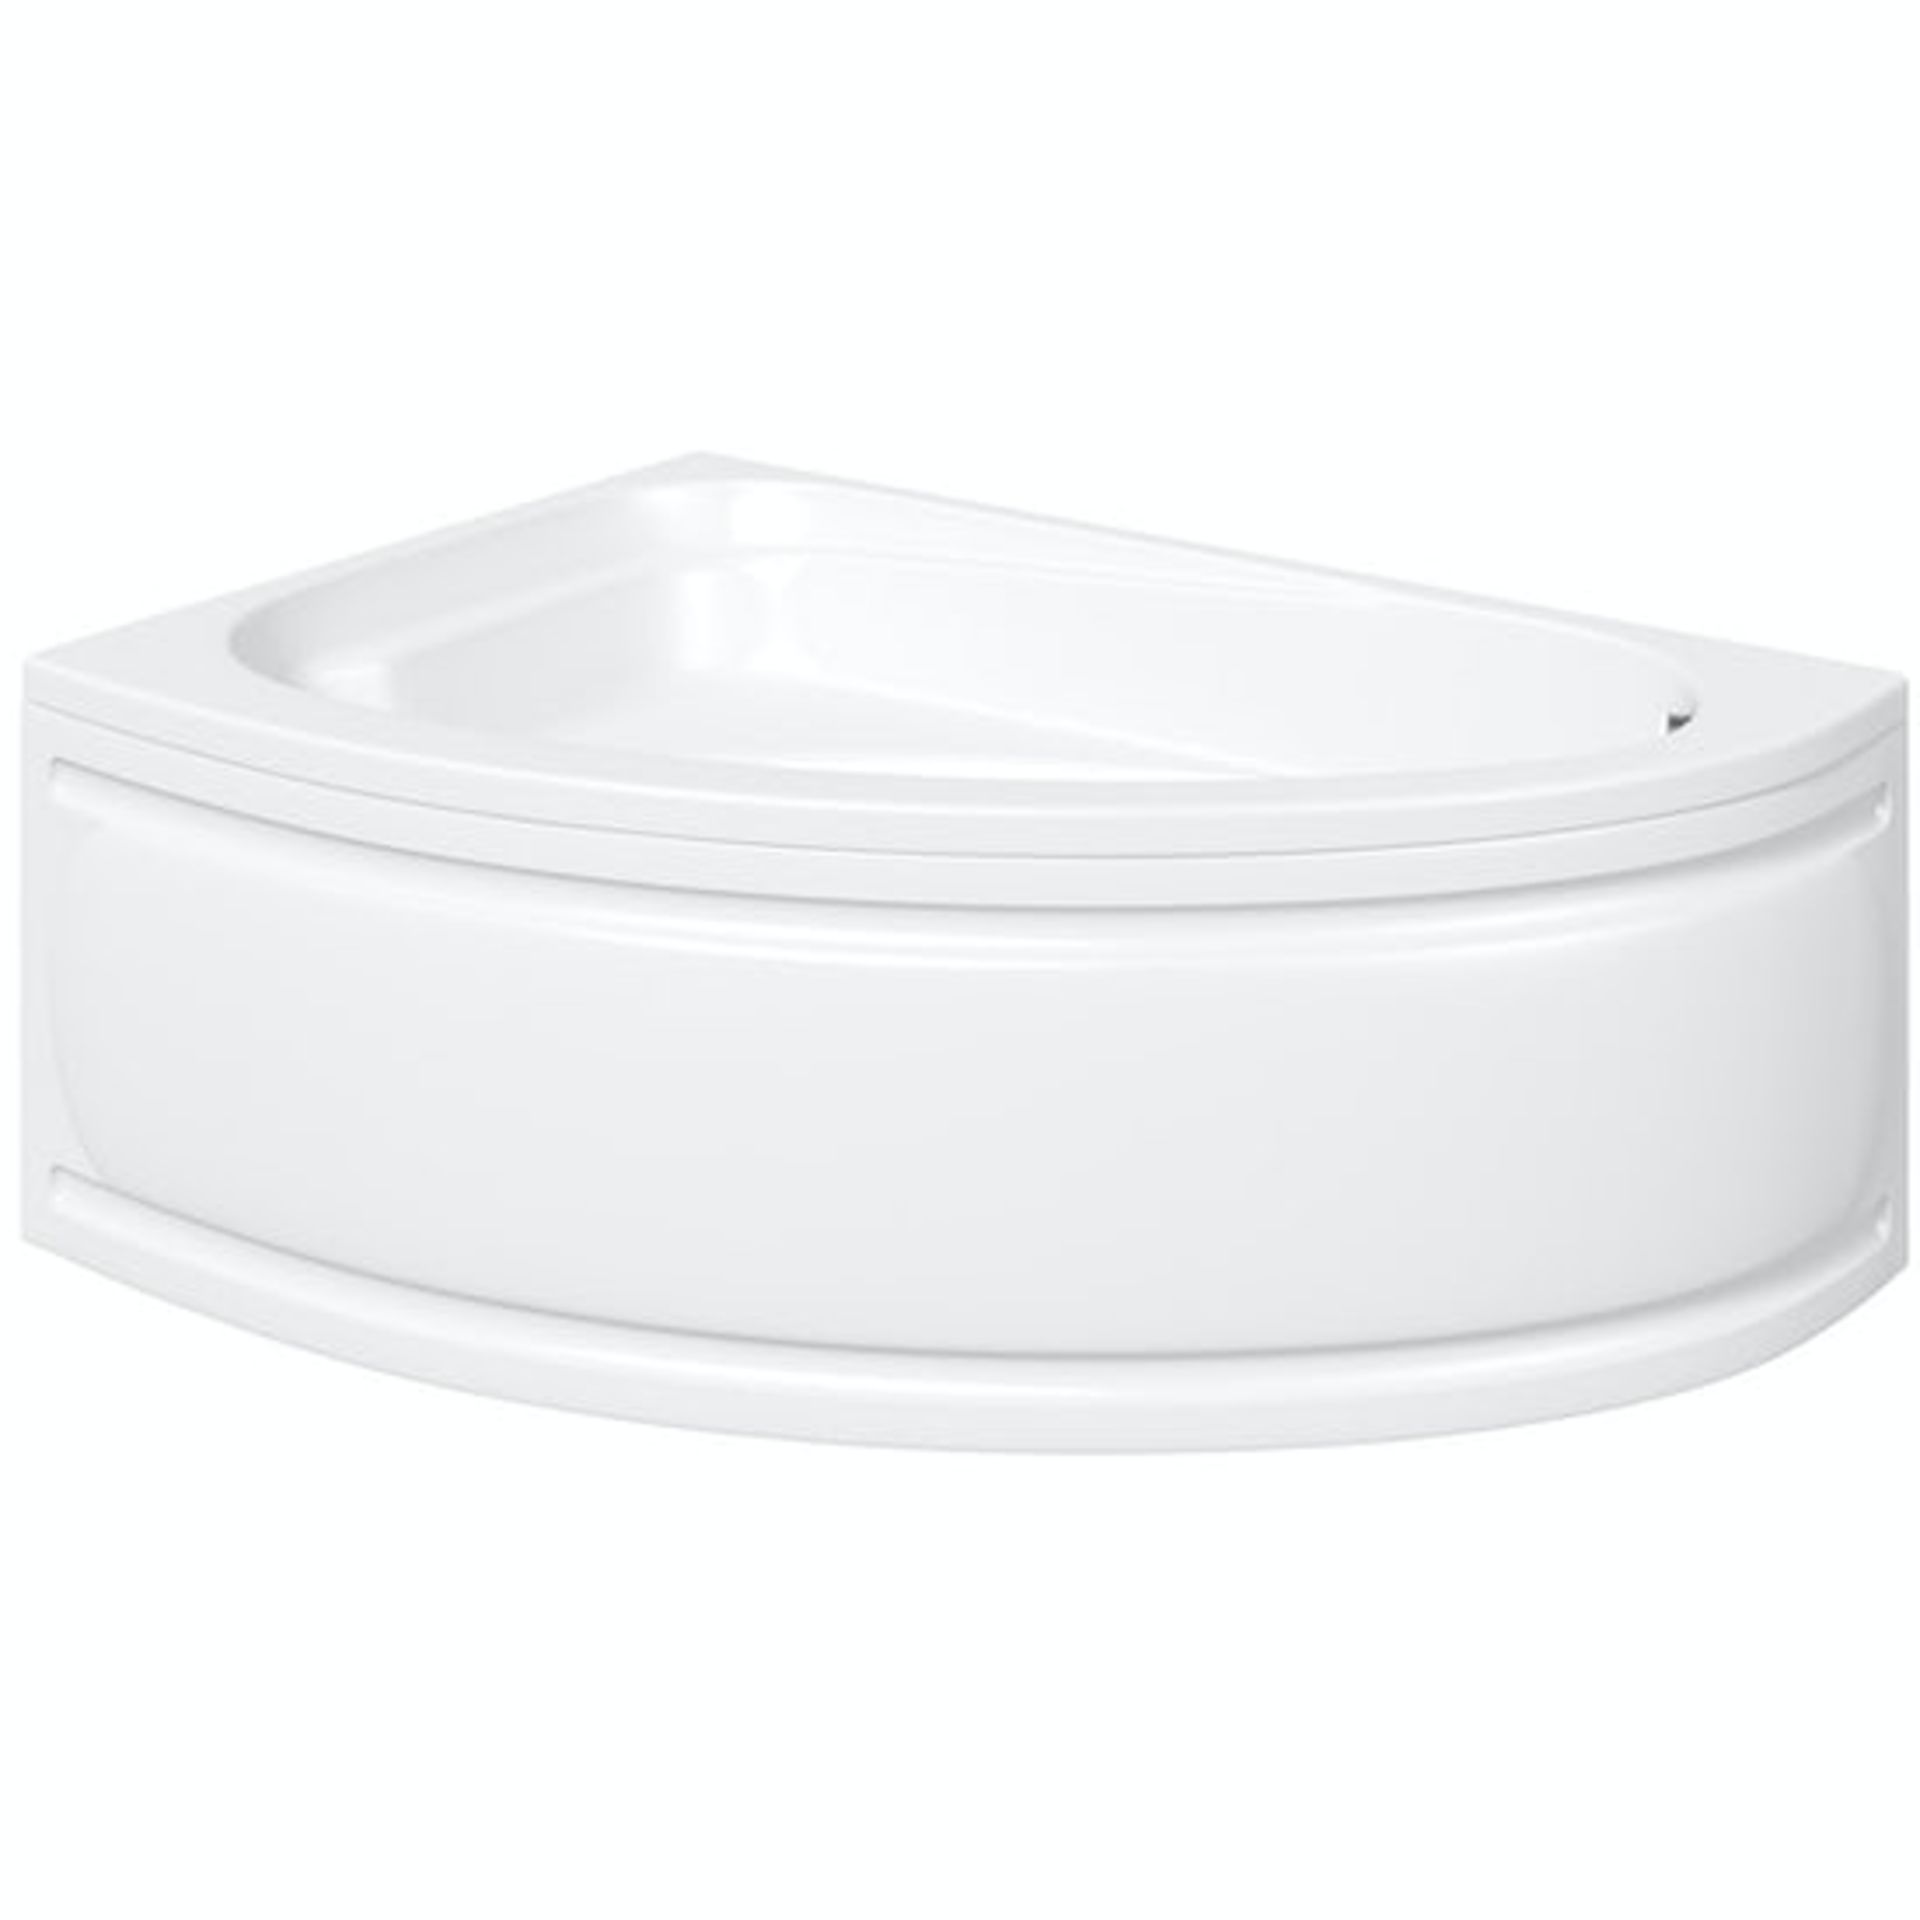 NEW (G108) 1000x1500mm Elsdon corner bath with seat. RRP £339.99. Panel not included. Manuf... - Image 2 of 3